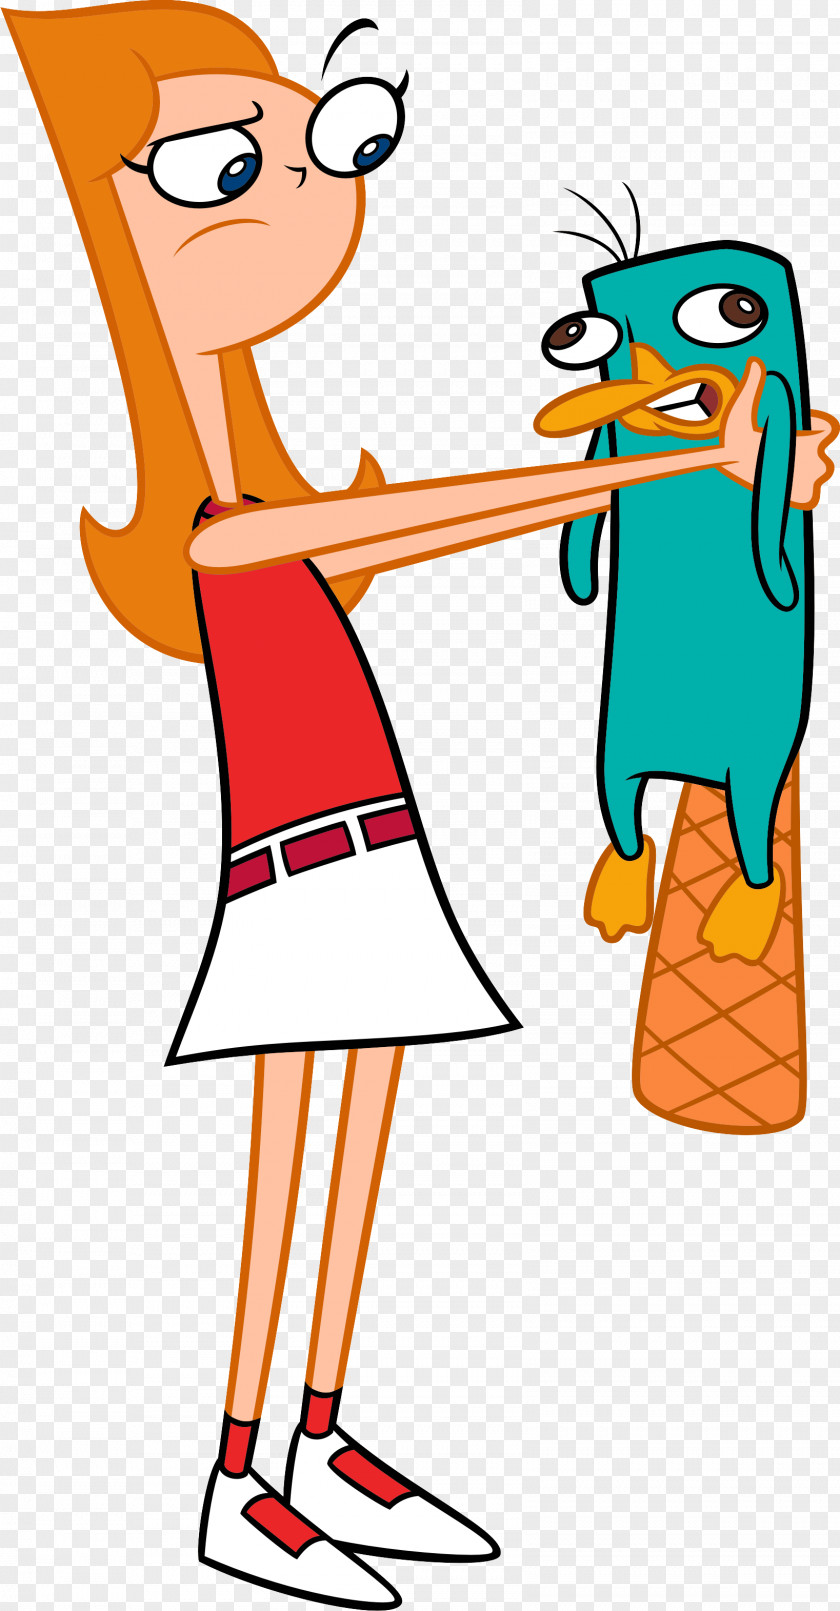 Candace Flynn Phineas And Ferb Perry The Platypus Fletcher Isabella Garcia-Shapiro PNG